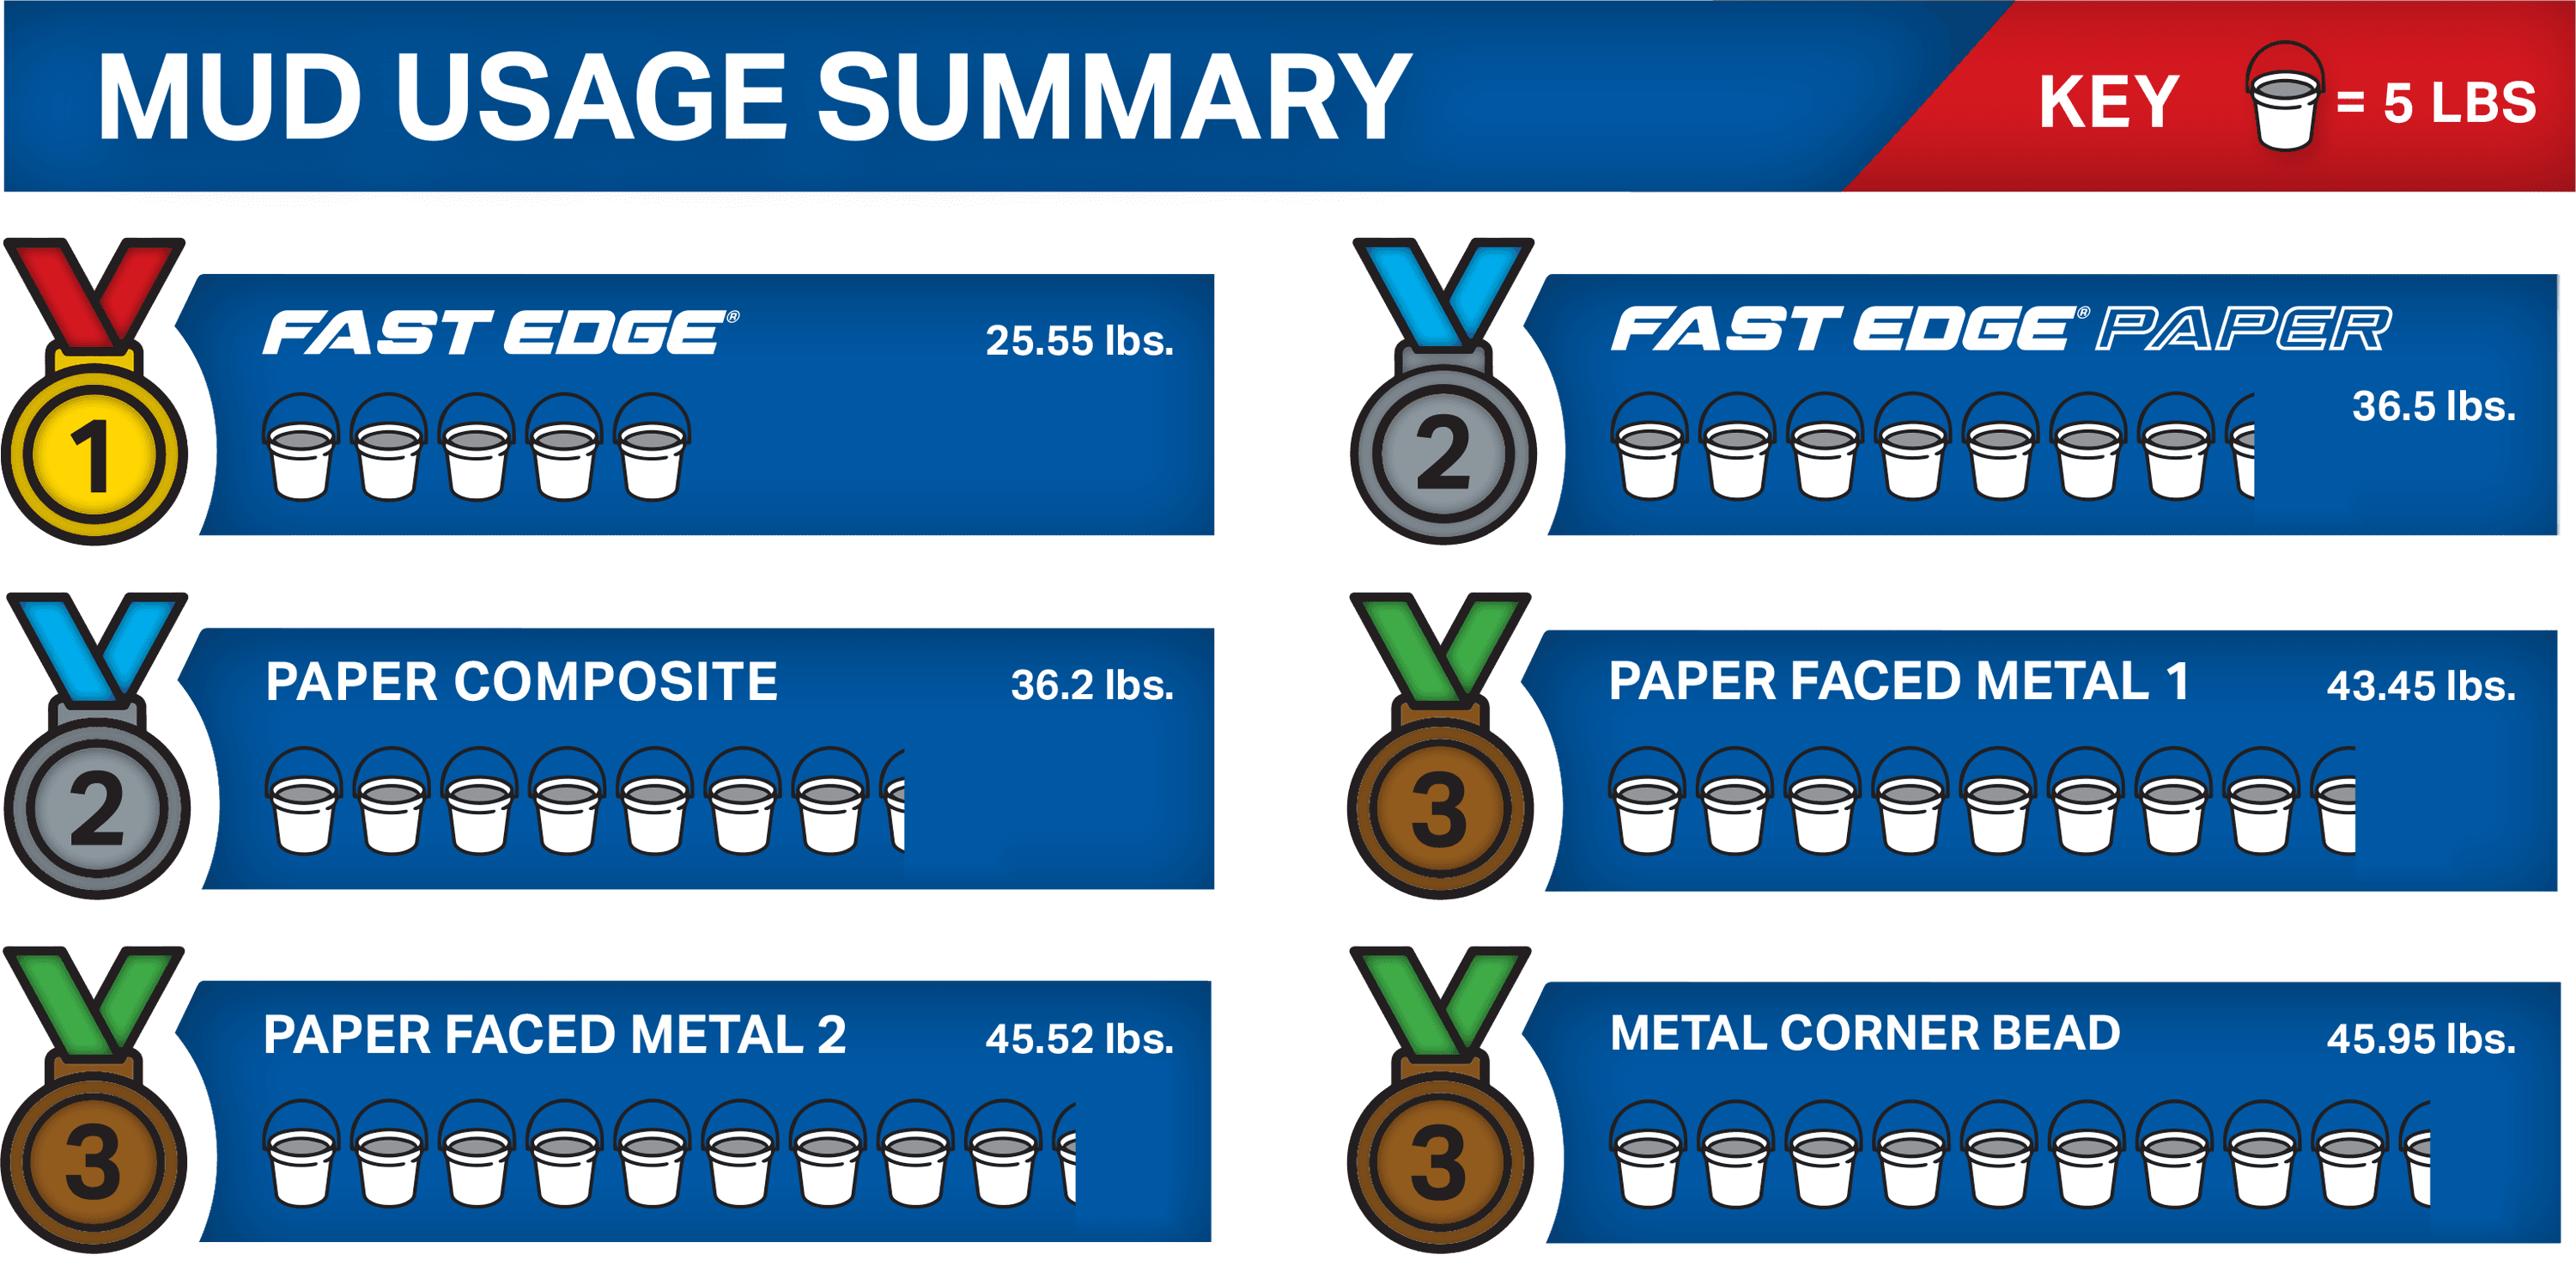 Fast Edge® Time and Material Study - Mud Usage Summary